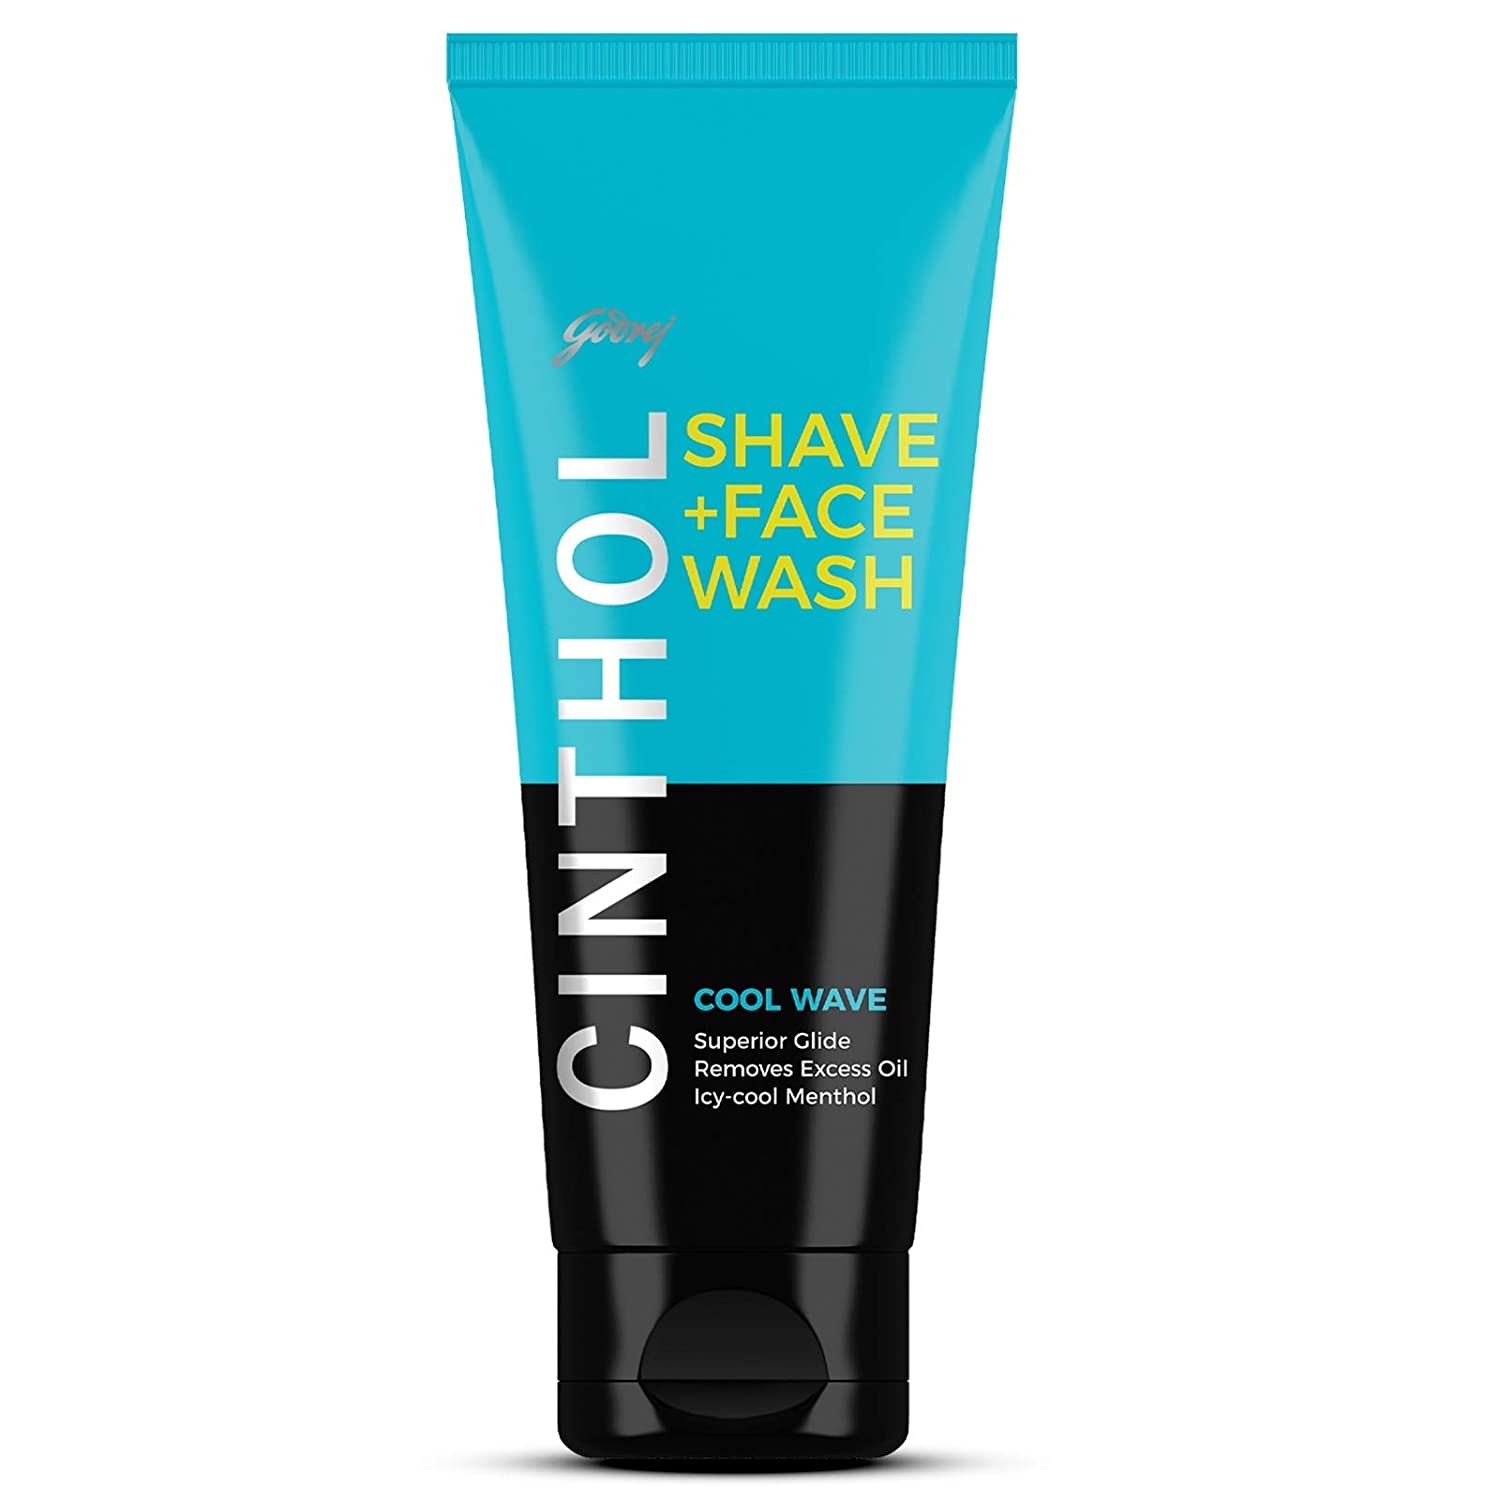 Cinthol 2-in-1 Shaving Cream + Face Wash - COOL WAVE, 50gm